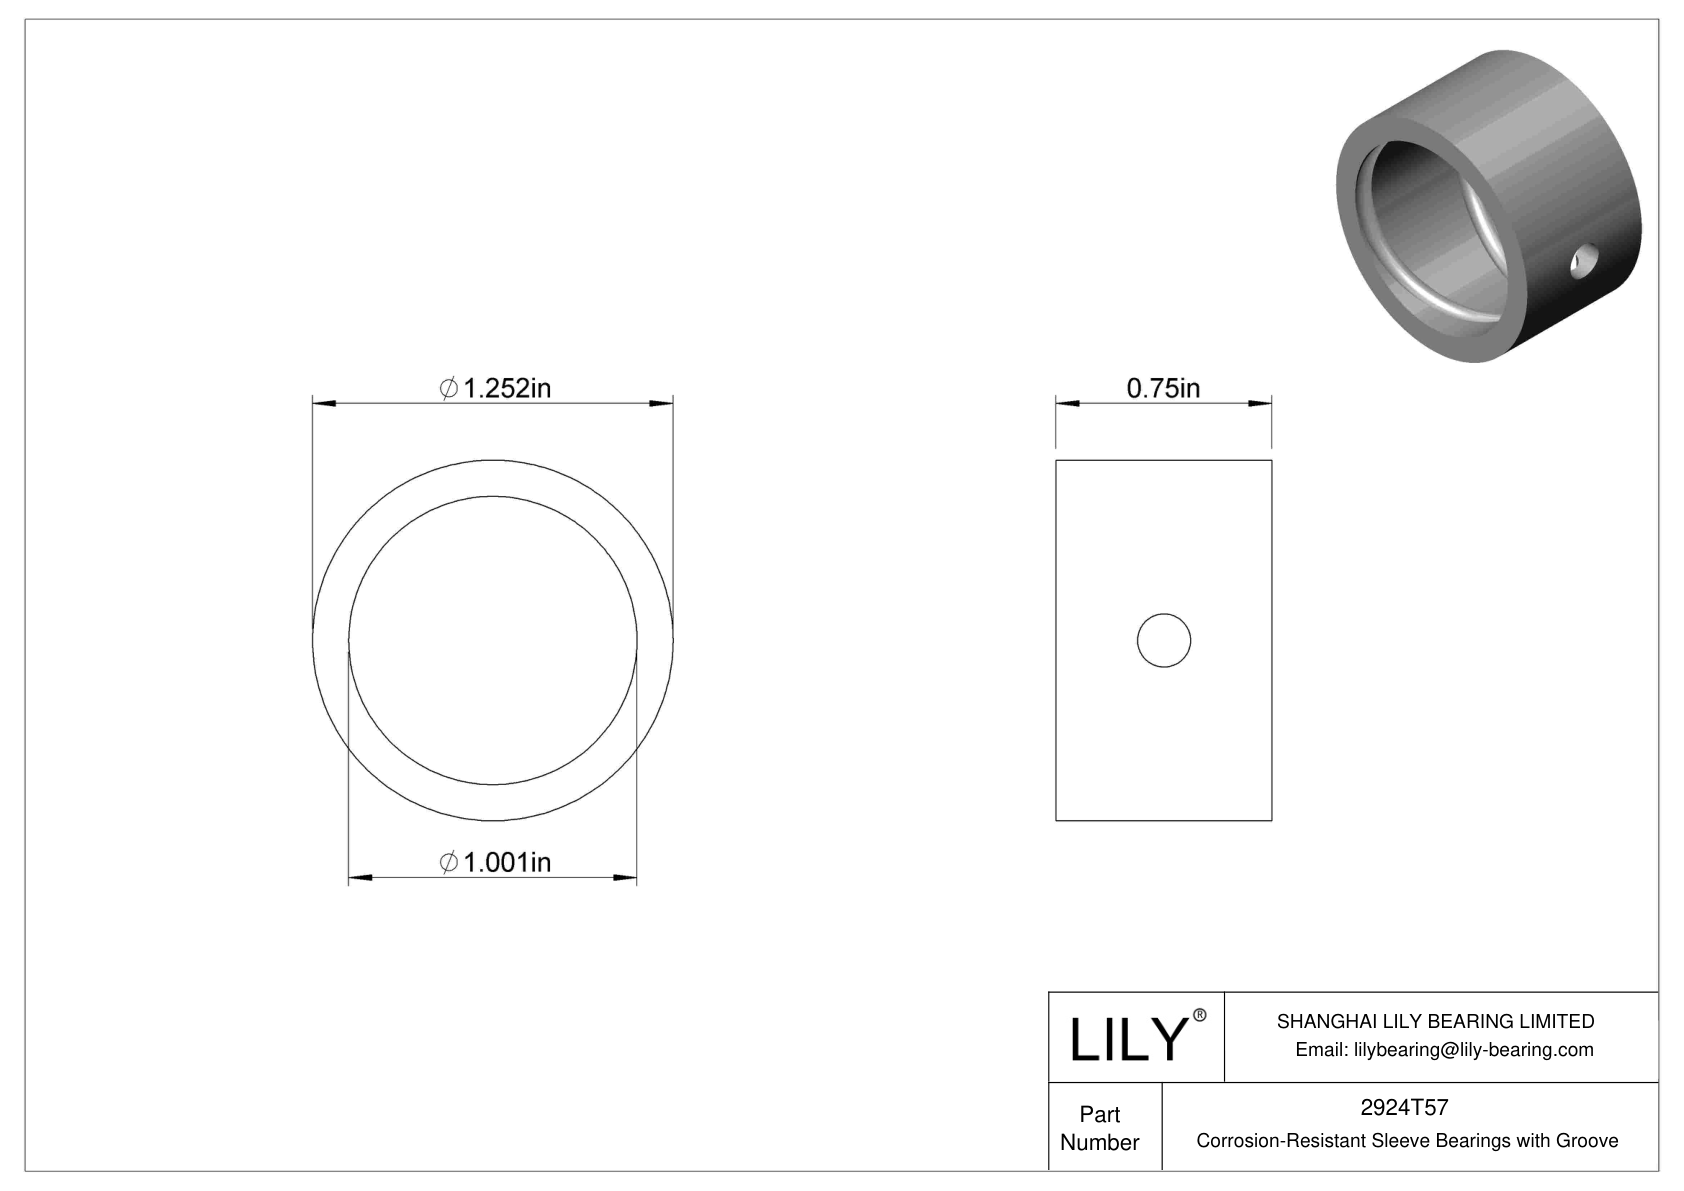 CJCETFH Corrosion-Resistant Sleeve Bearings with Groove cad drawing